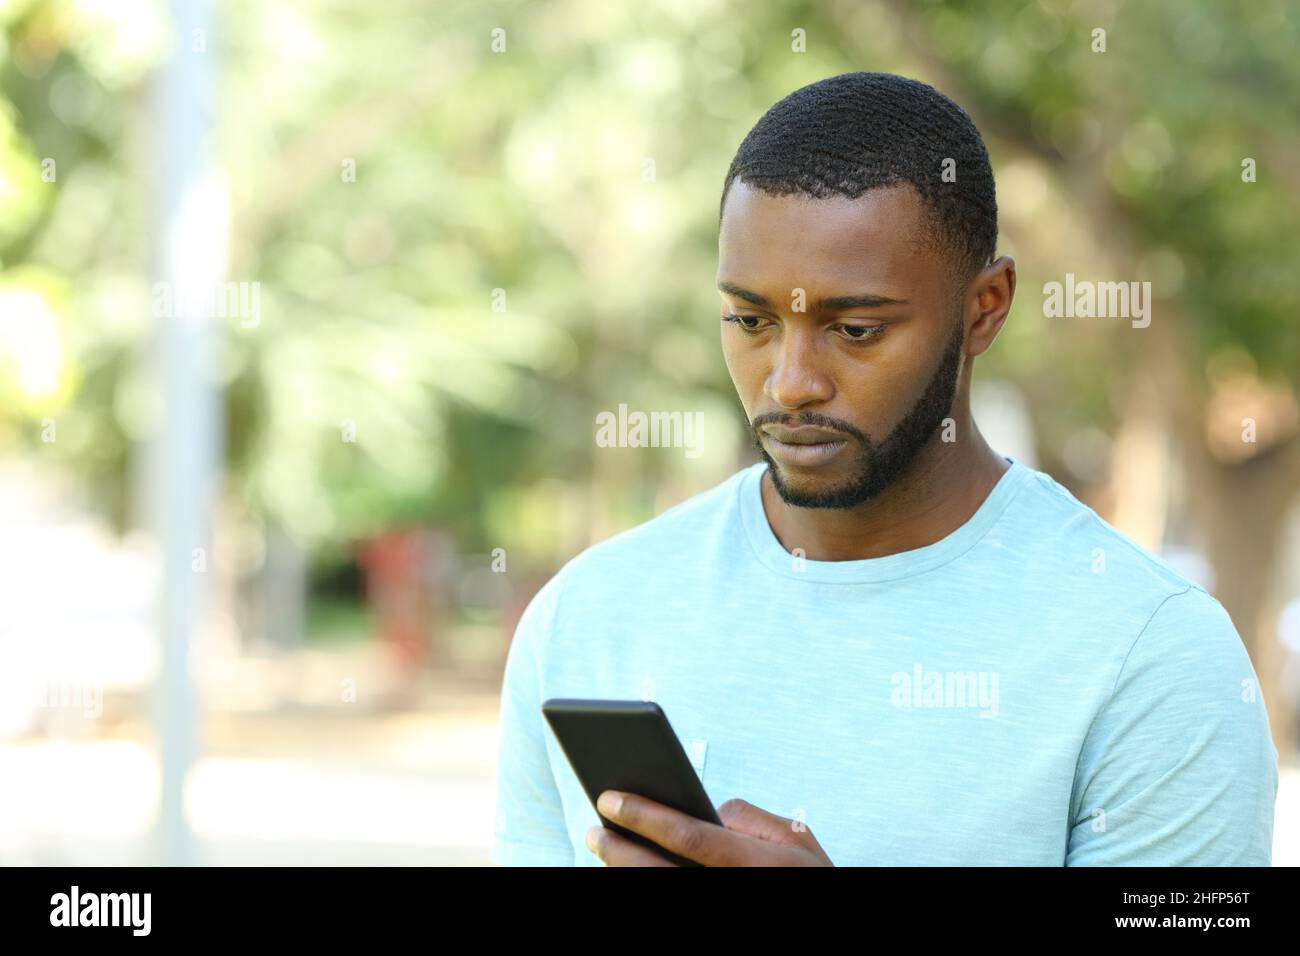 Worried man with black skin checking mobile phone walking in a park Stock Photo